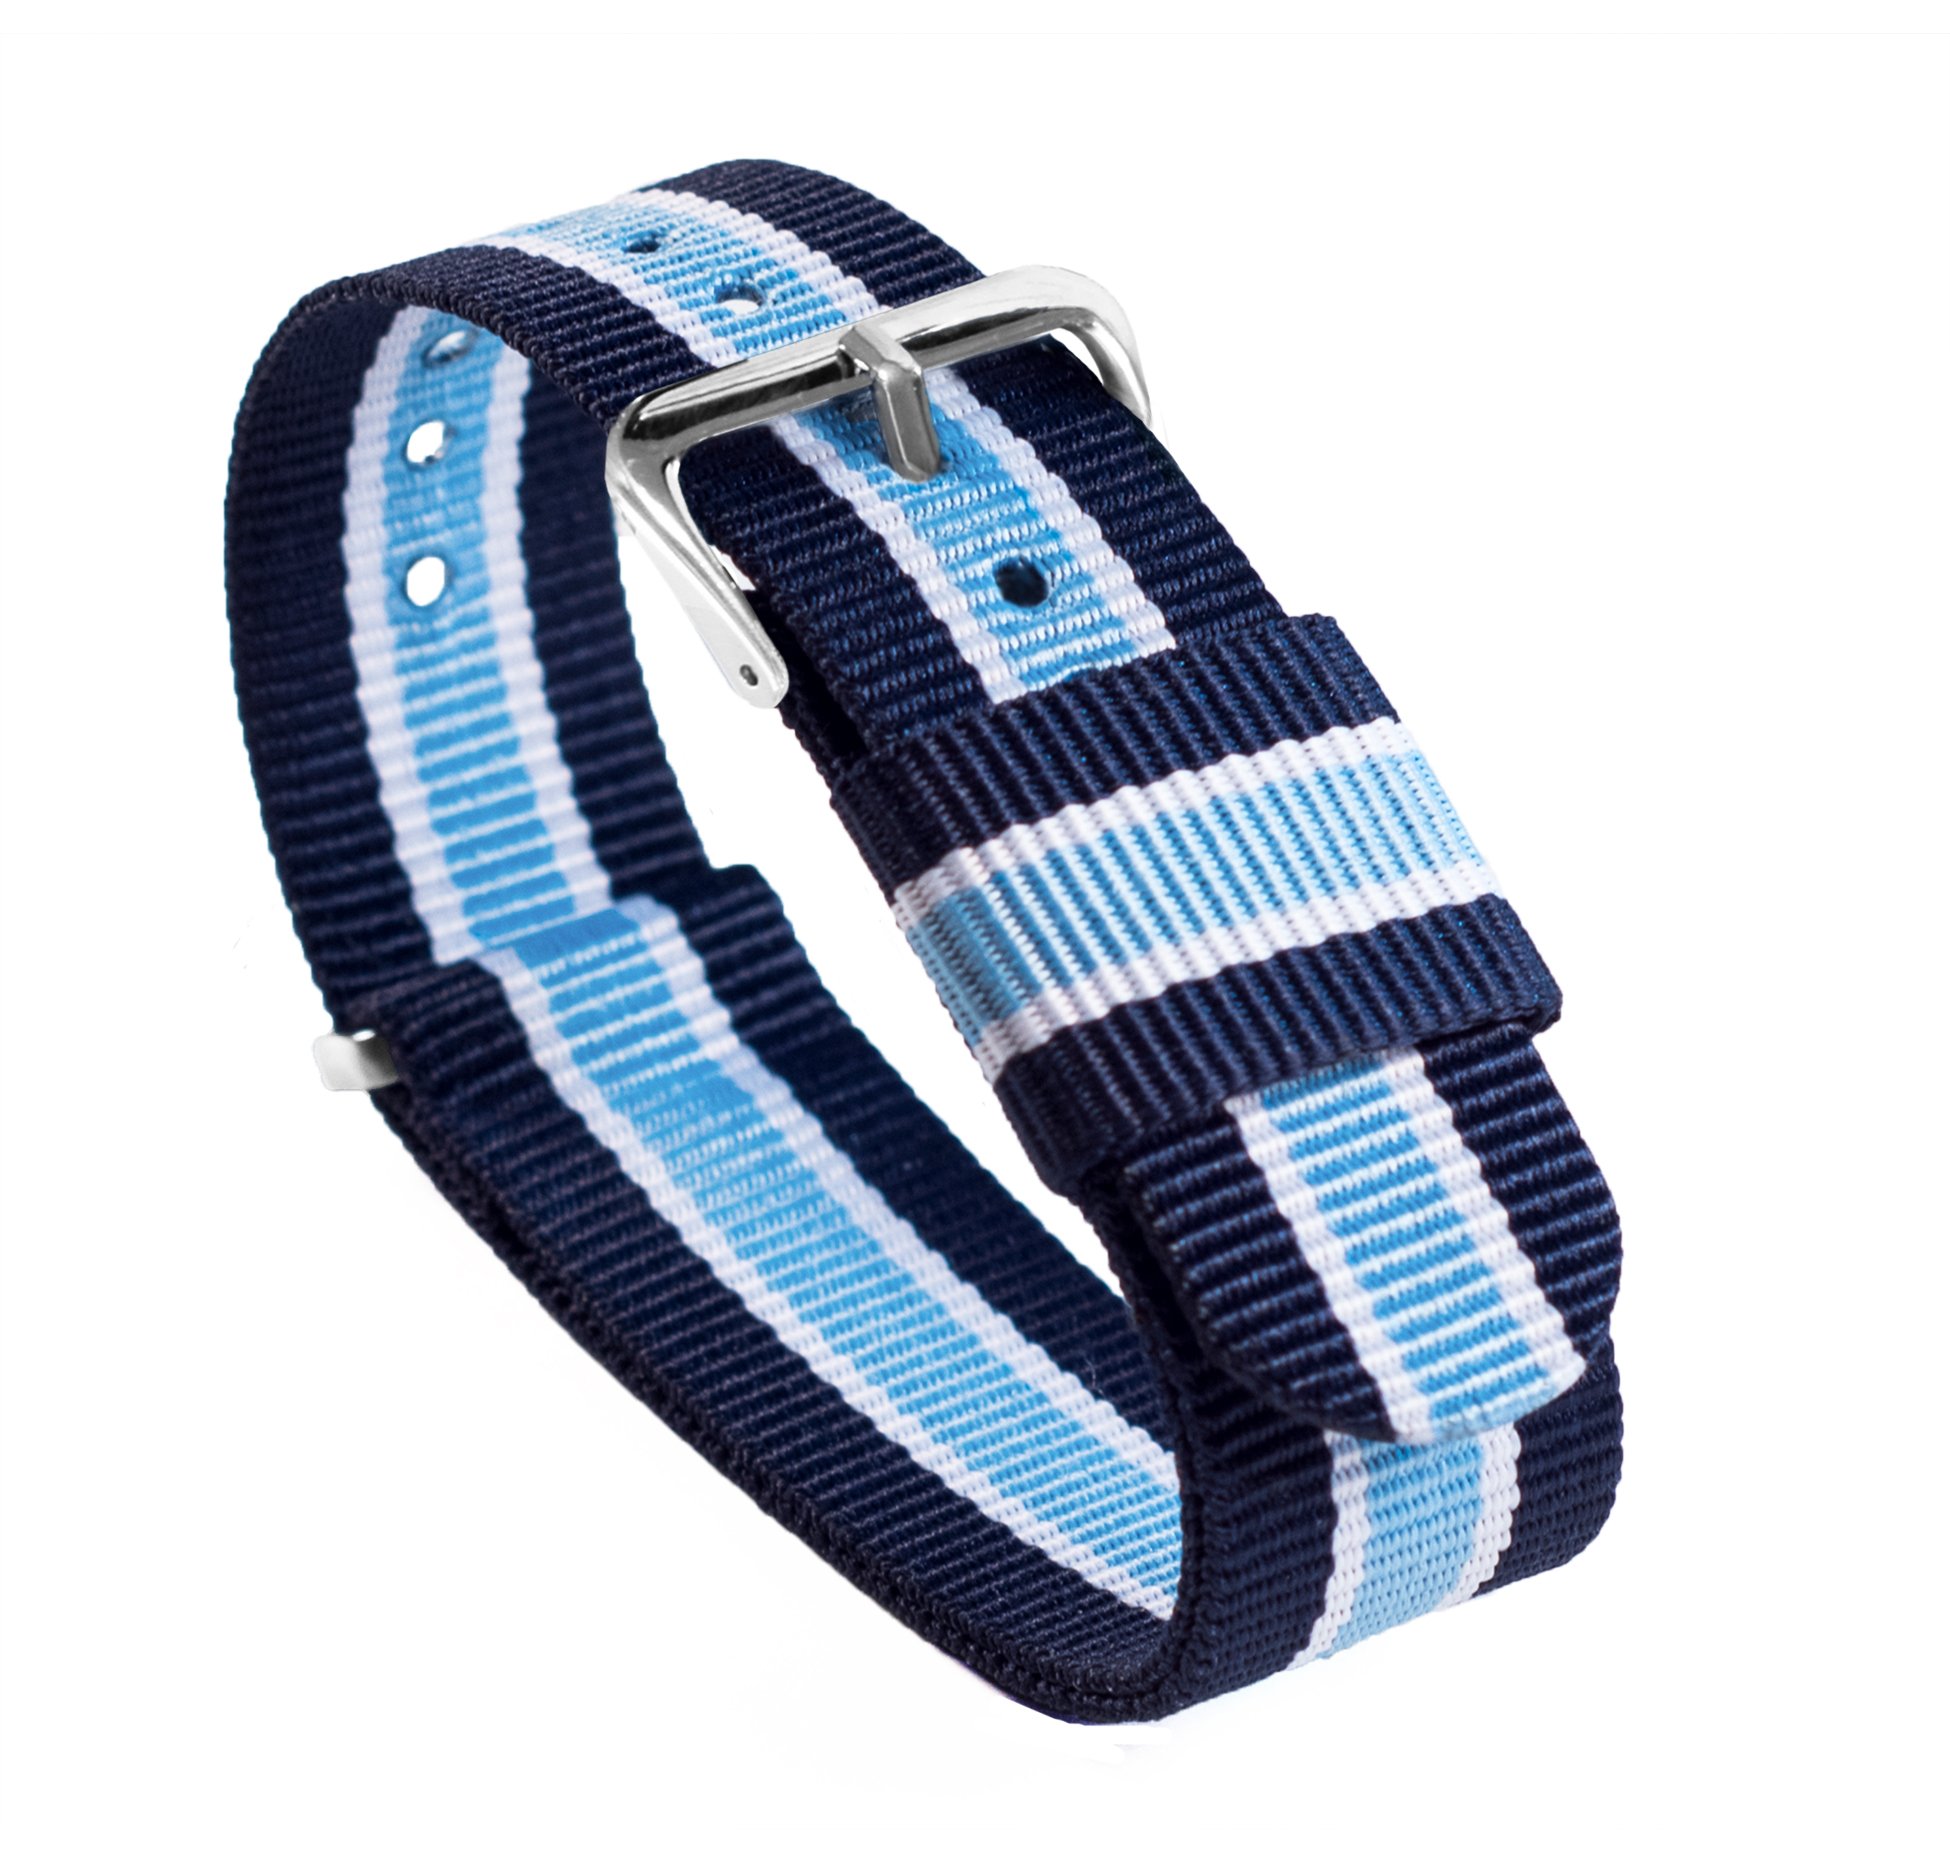 BARTON Watch Bands - Ballistic Nylon NATO® Style Straps - Choice of Color, Length & Width (18mm, 20mm, 22mm or 24mm)